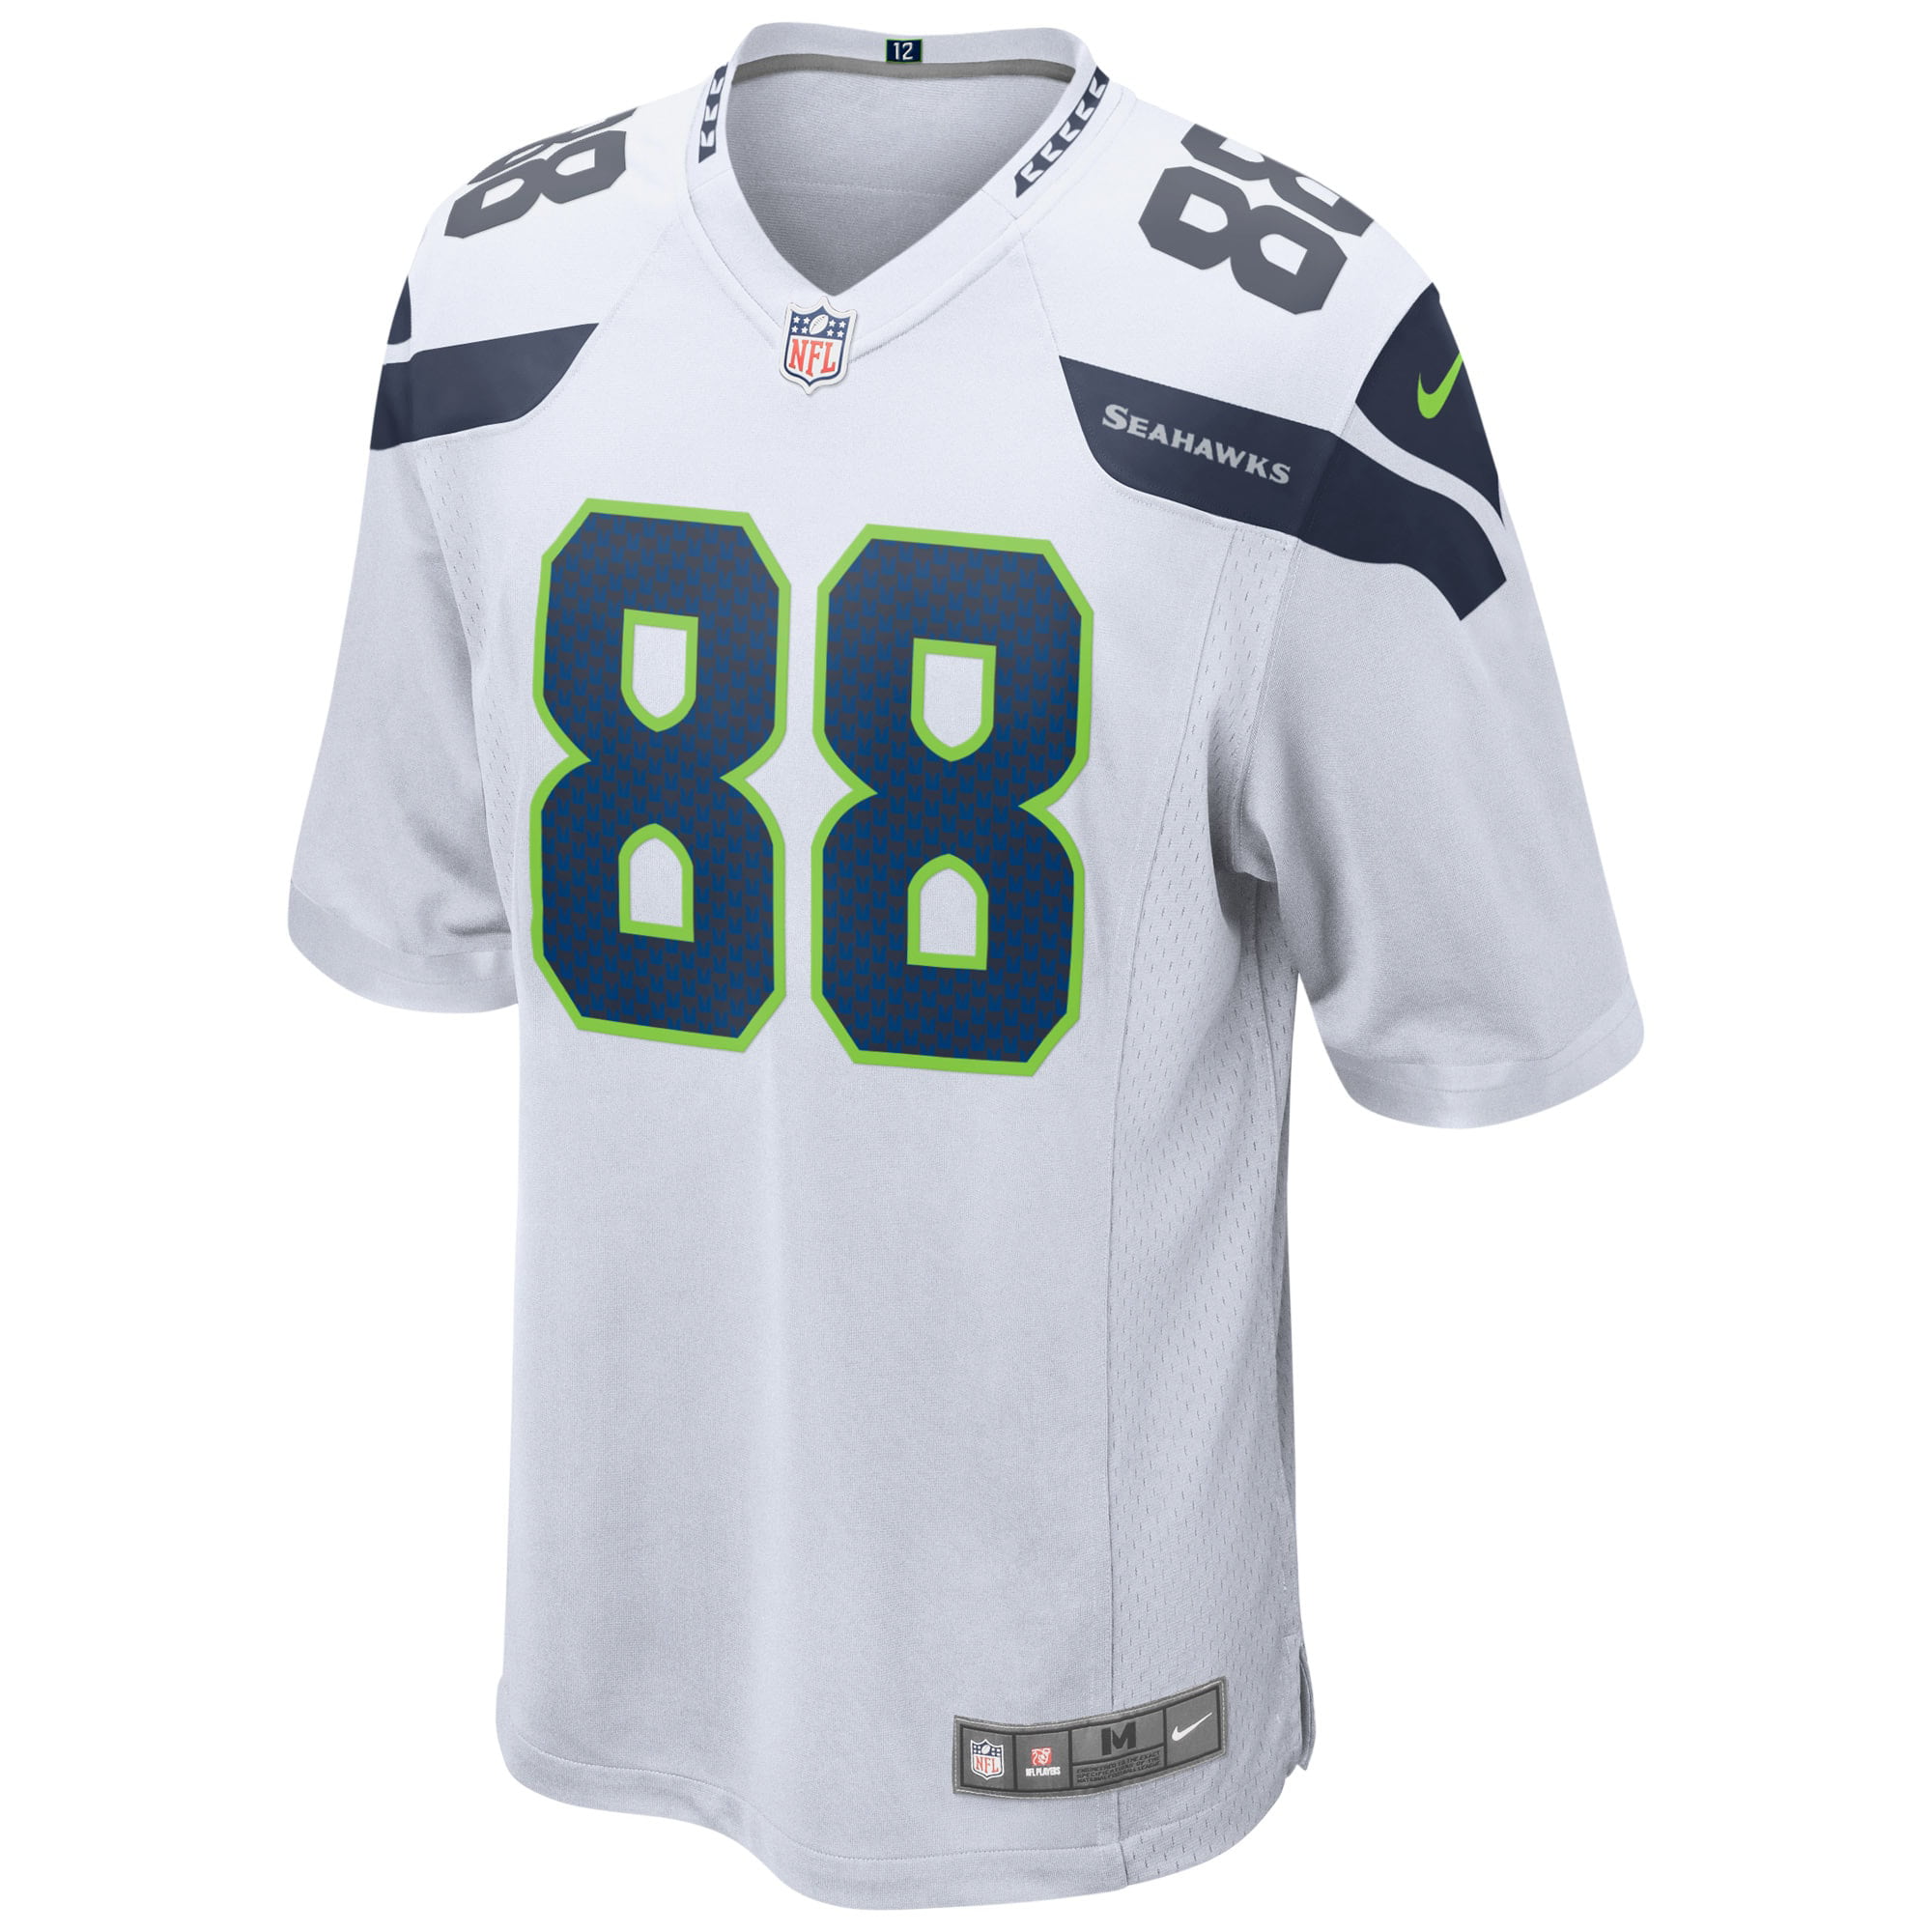 jimmy graham jersey number